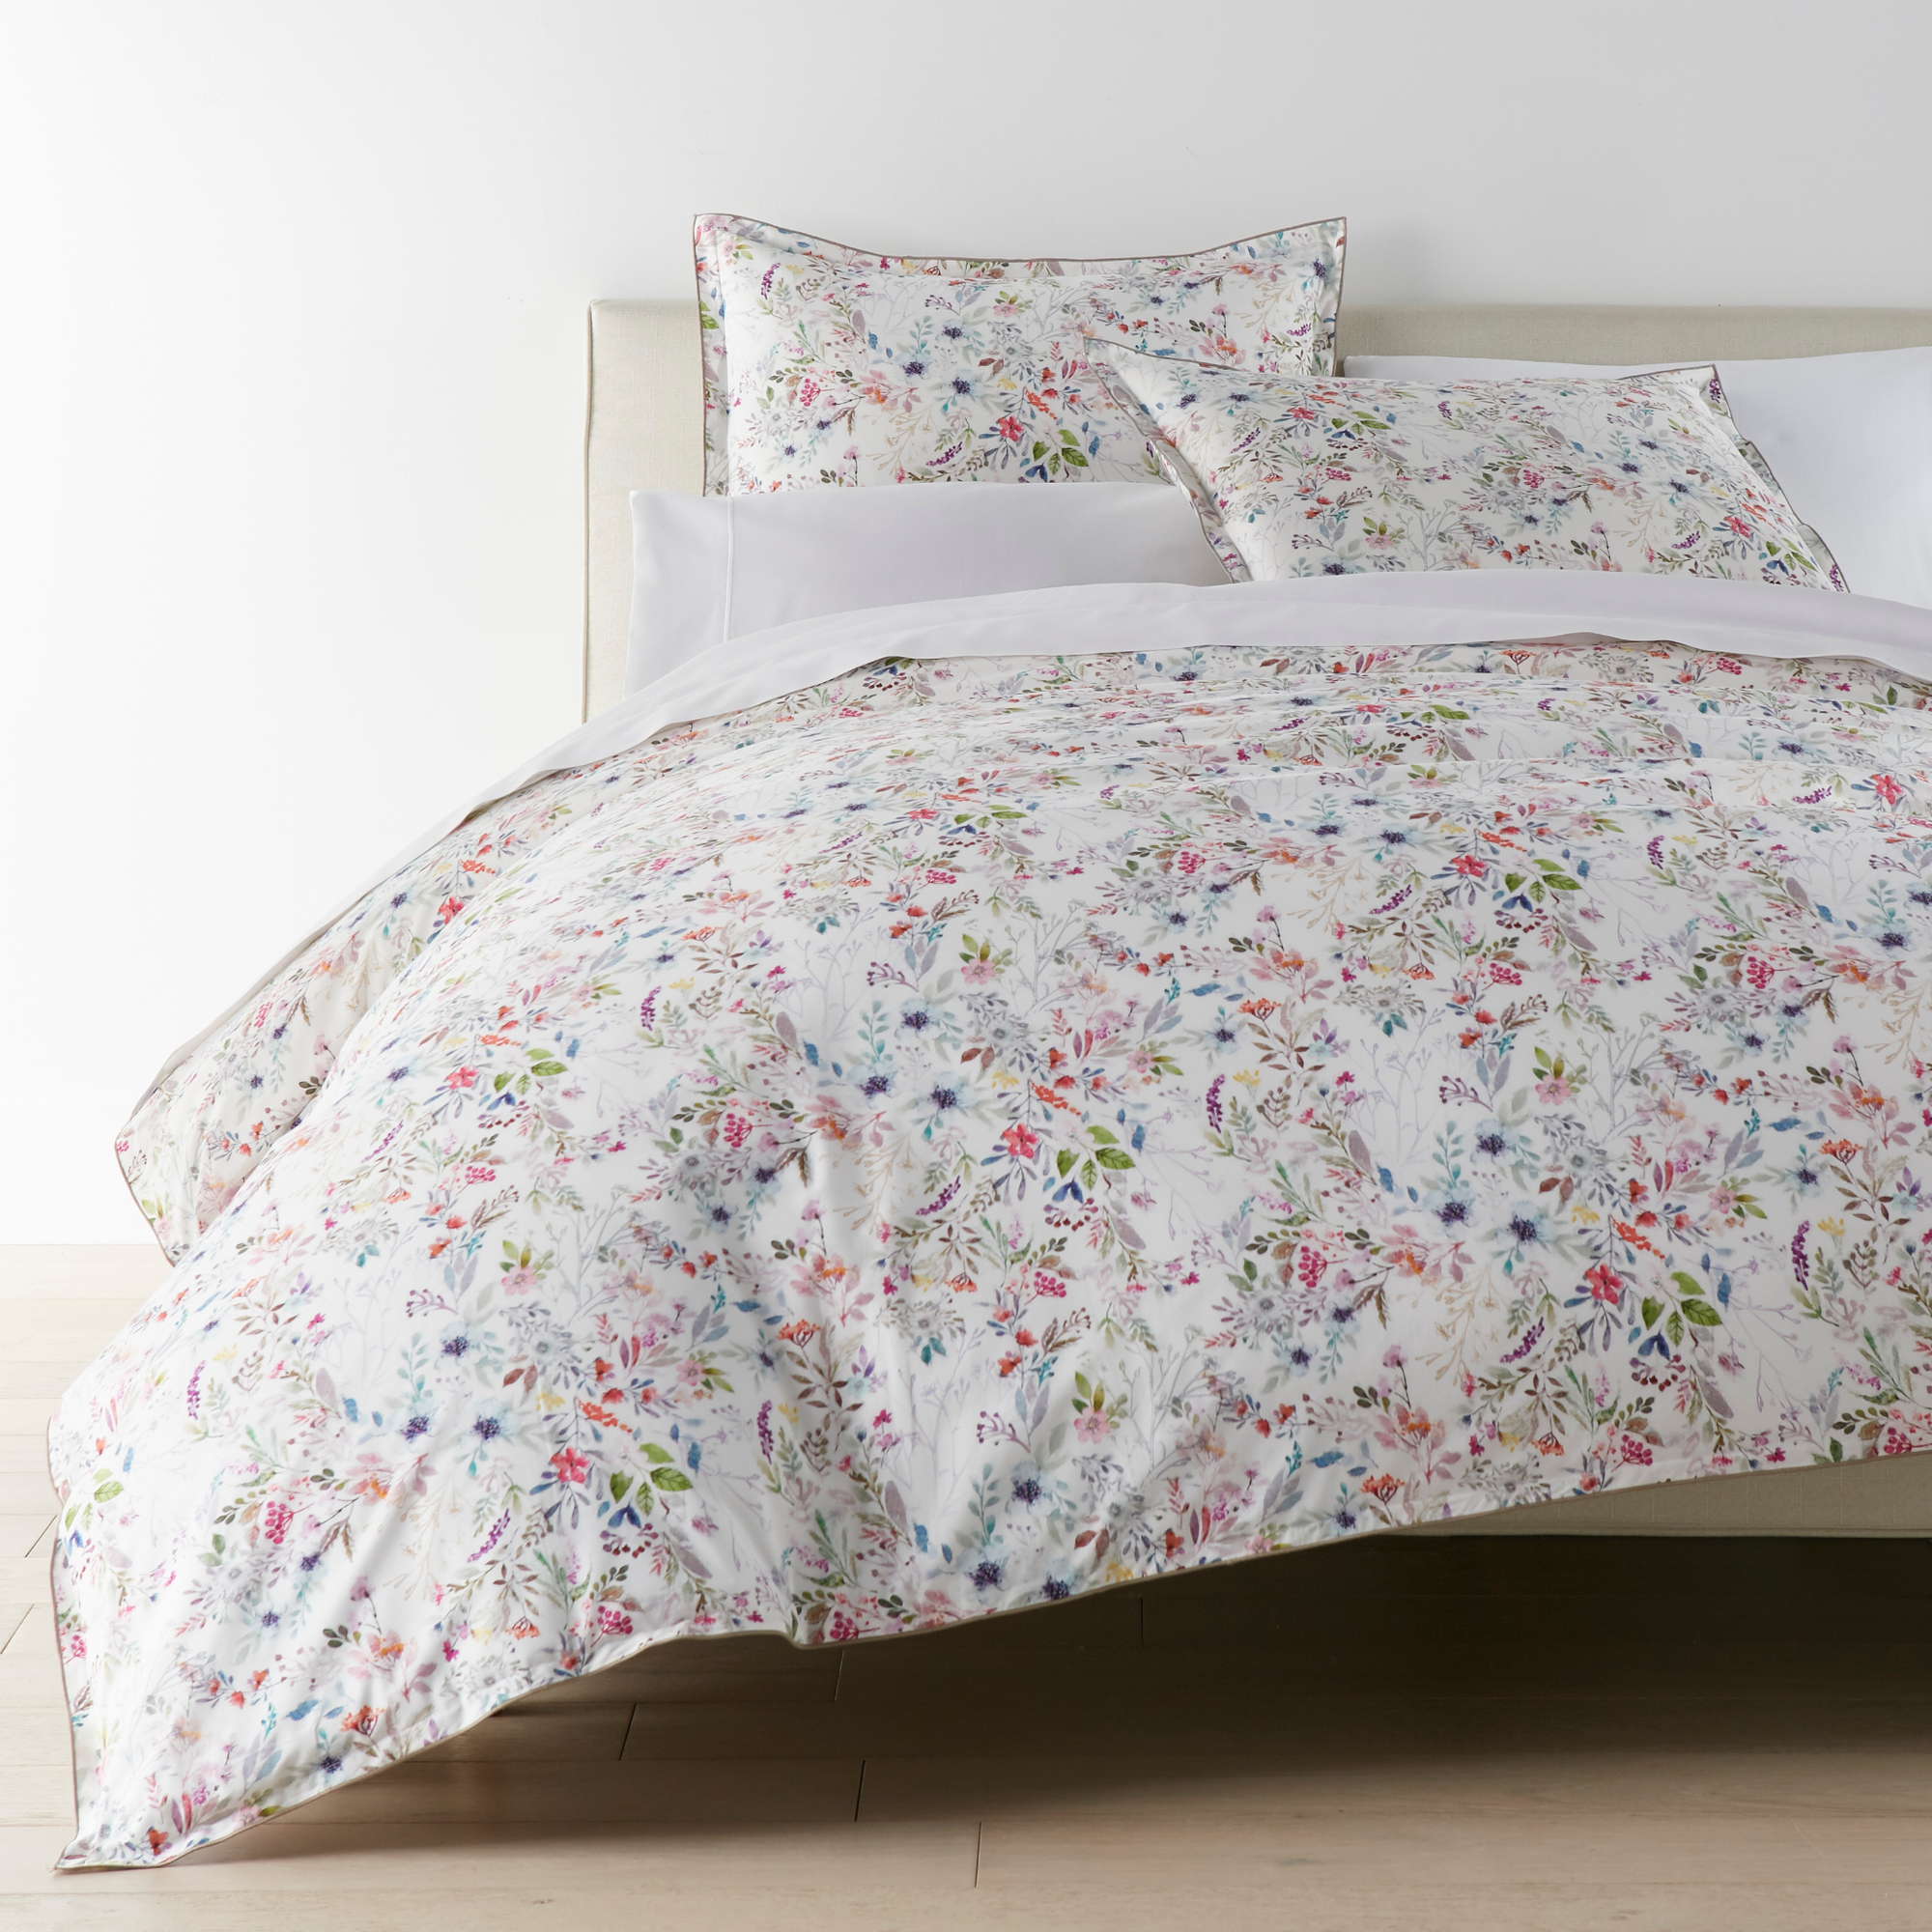 Full Bedding Dressed in Peacock Alley Chloe Collection in Color Floral